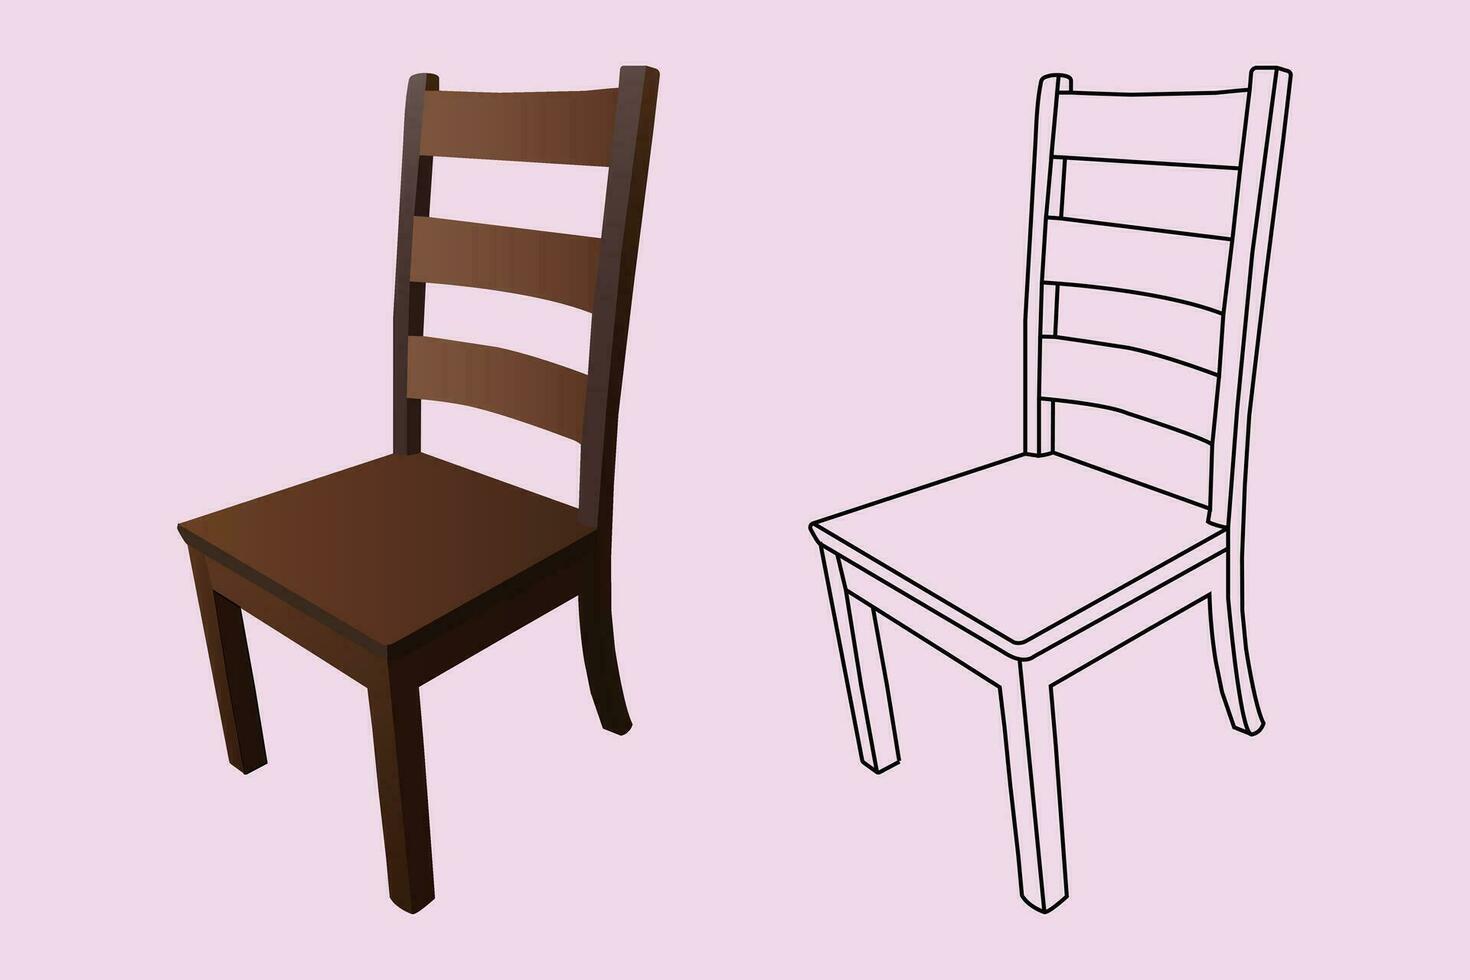 Classic wooden chair in cartoon style isolated on vector illustration